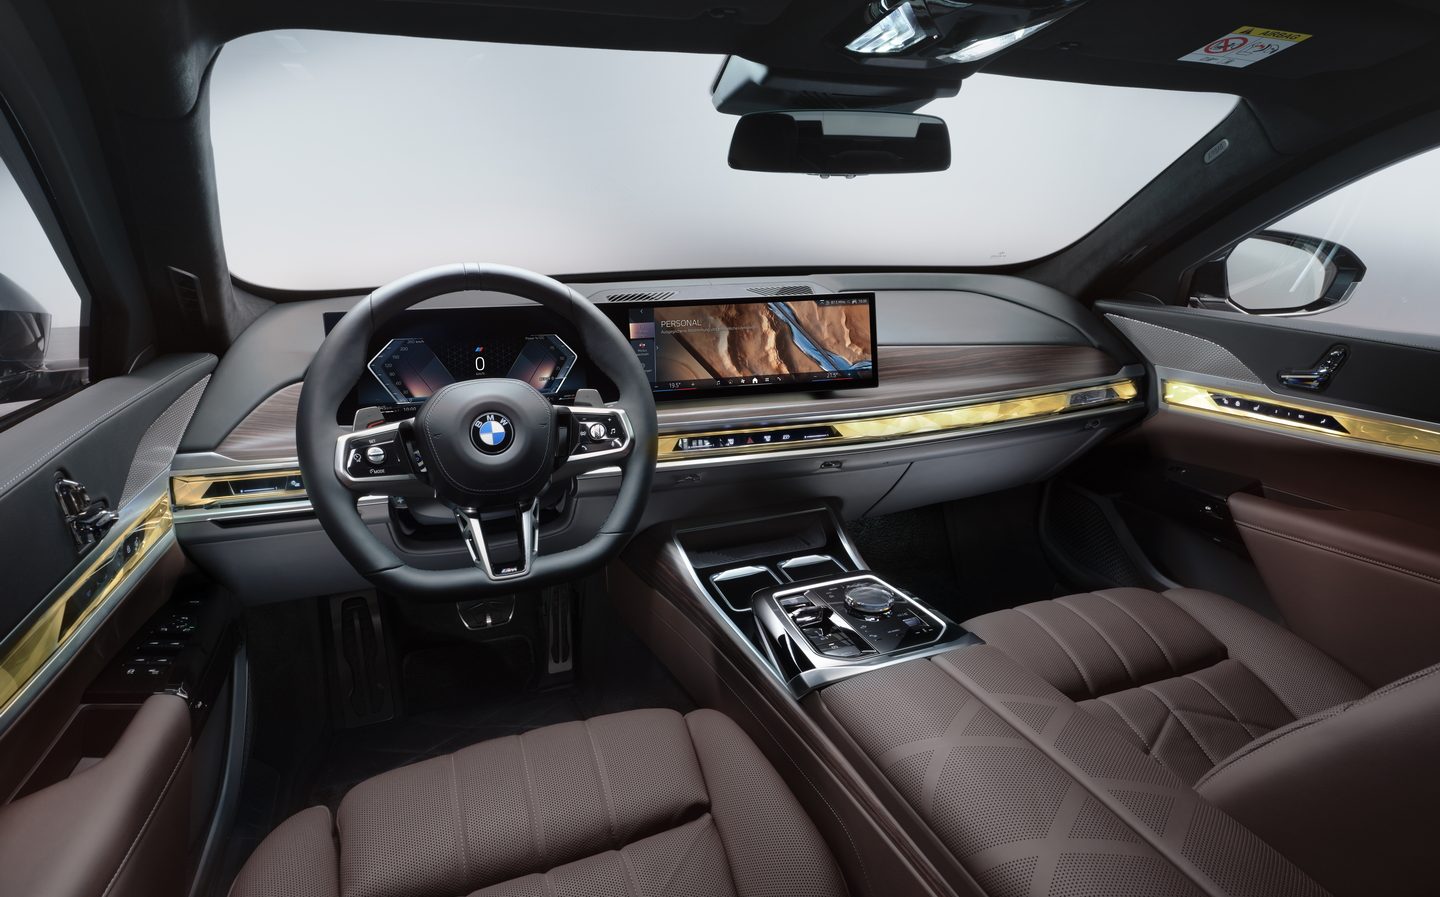 7 series, armoured car, car protection, want an armoured electric car? the bmw i7 protection is the answer